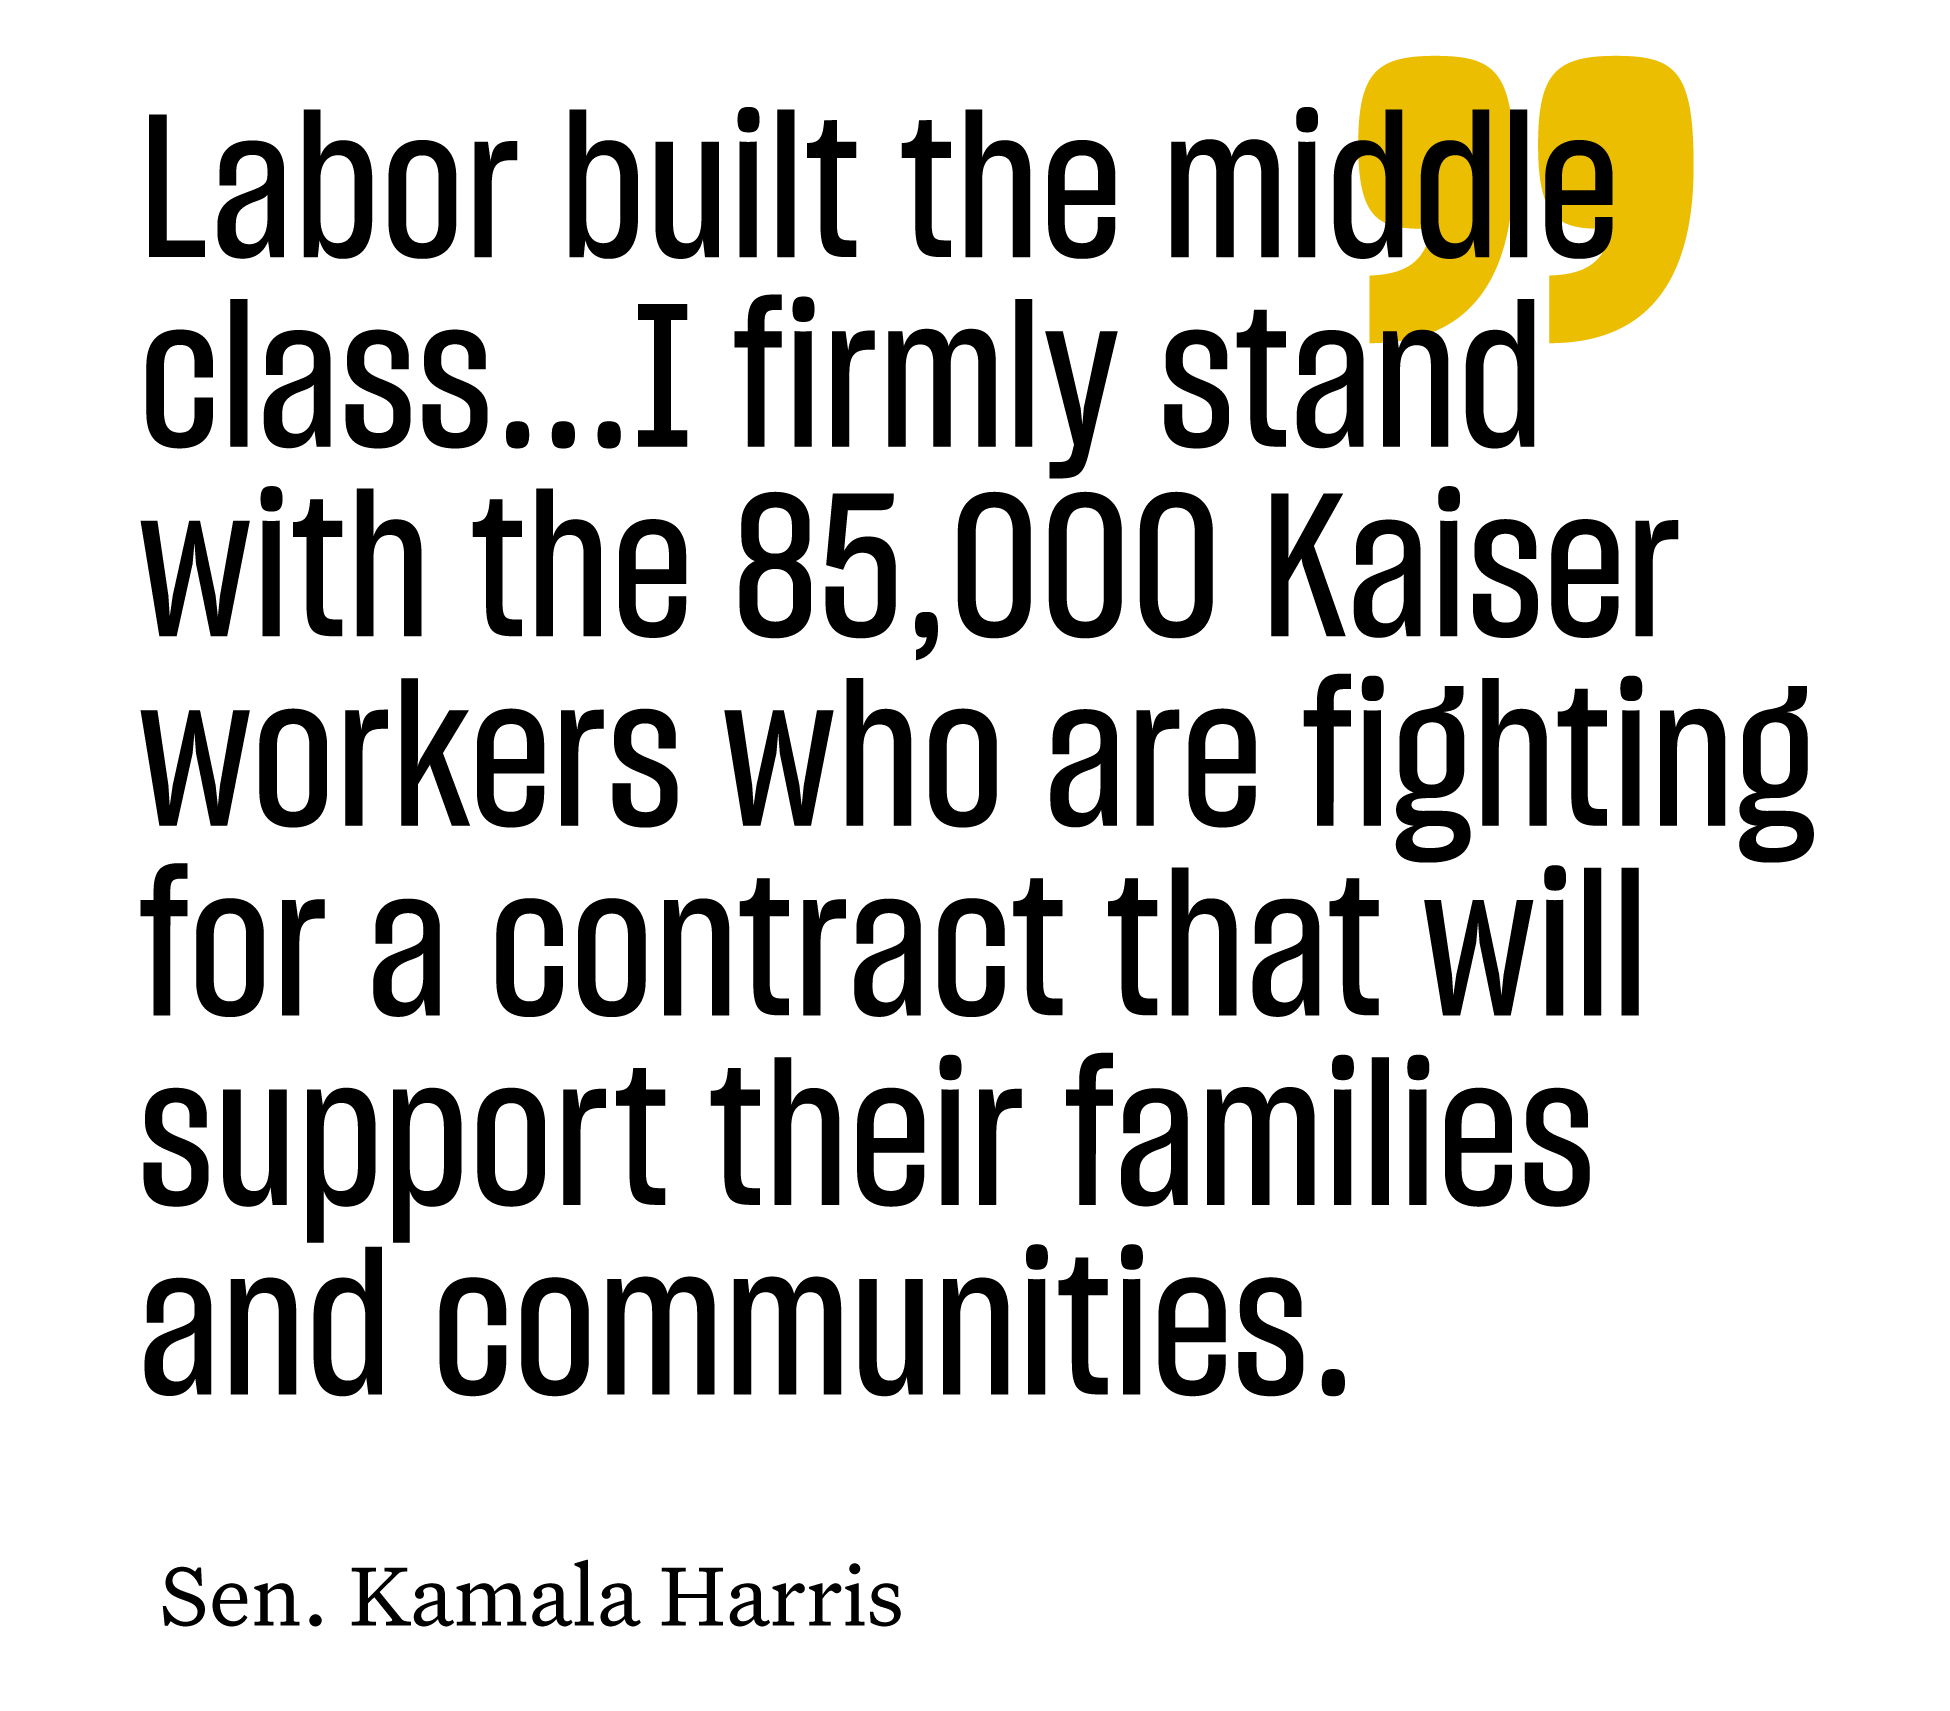 "Labor built the middle class...I firmly stand with the 85,000 Kaiser workers who are fighting for a contract that will support their families and communities." Sen. Kamala Harris